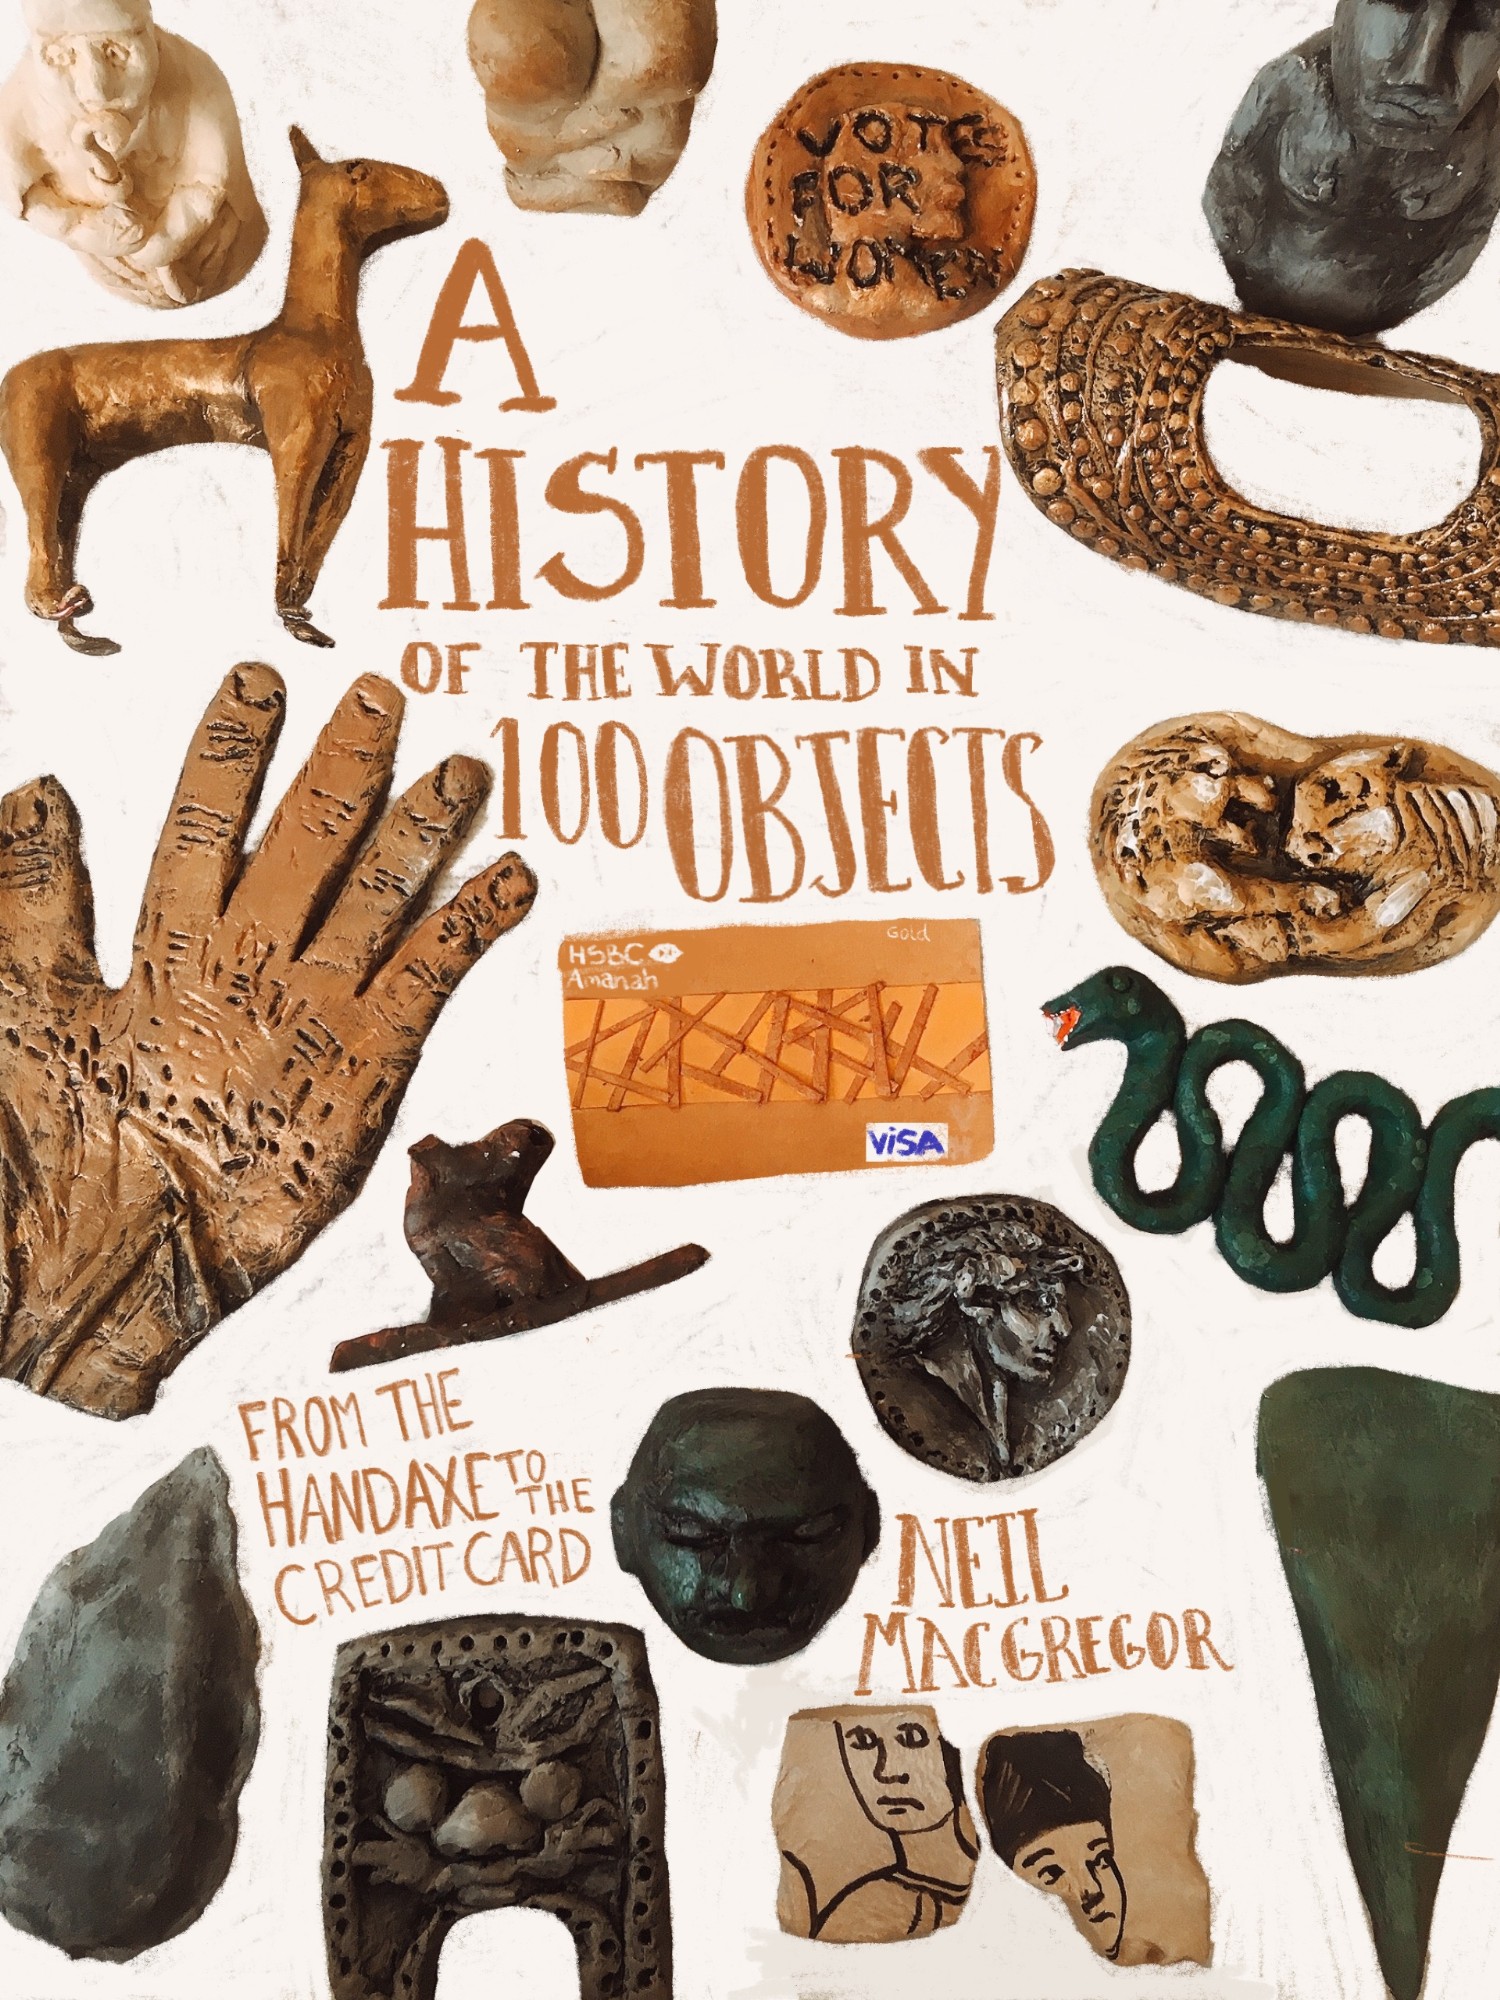 "History of the World in 100 Objects" book cover